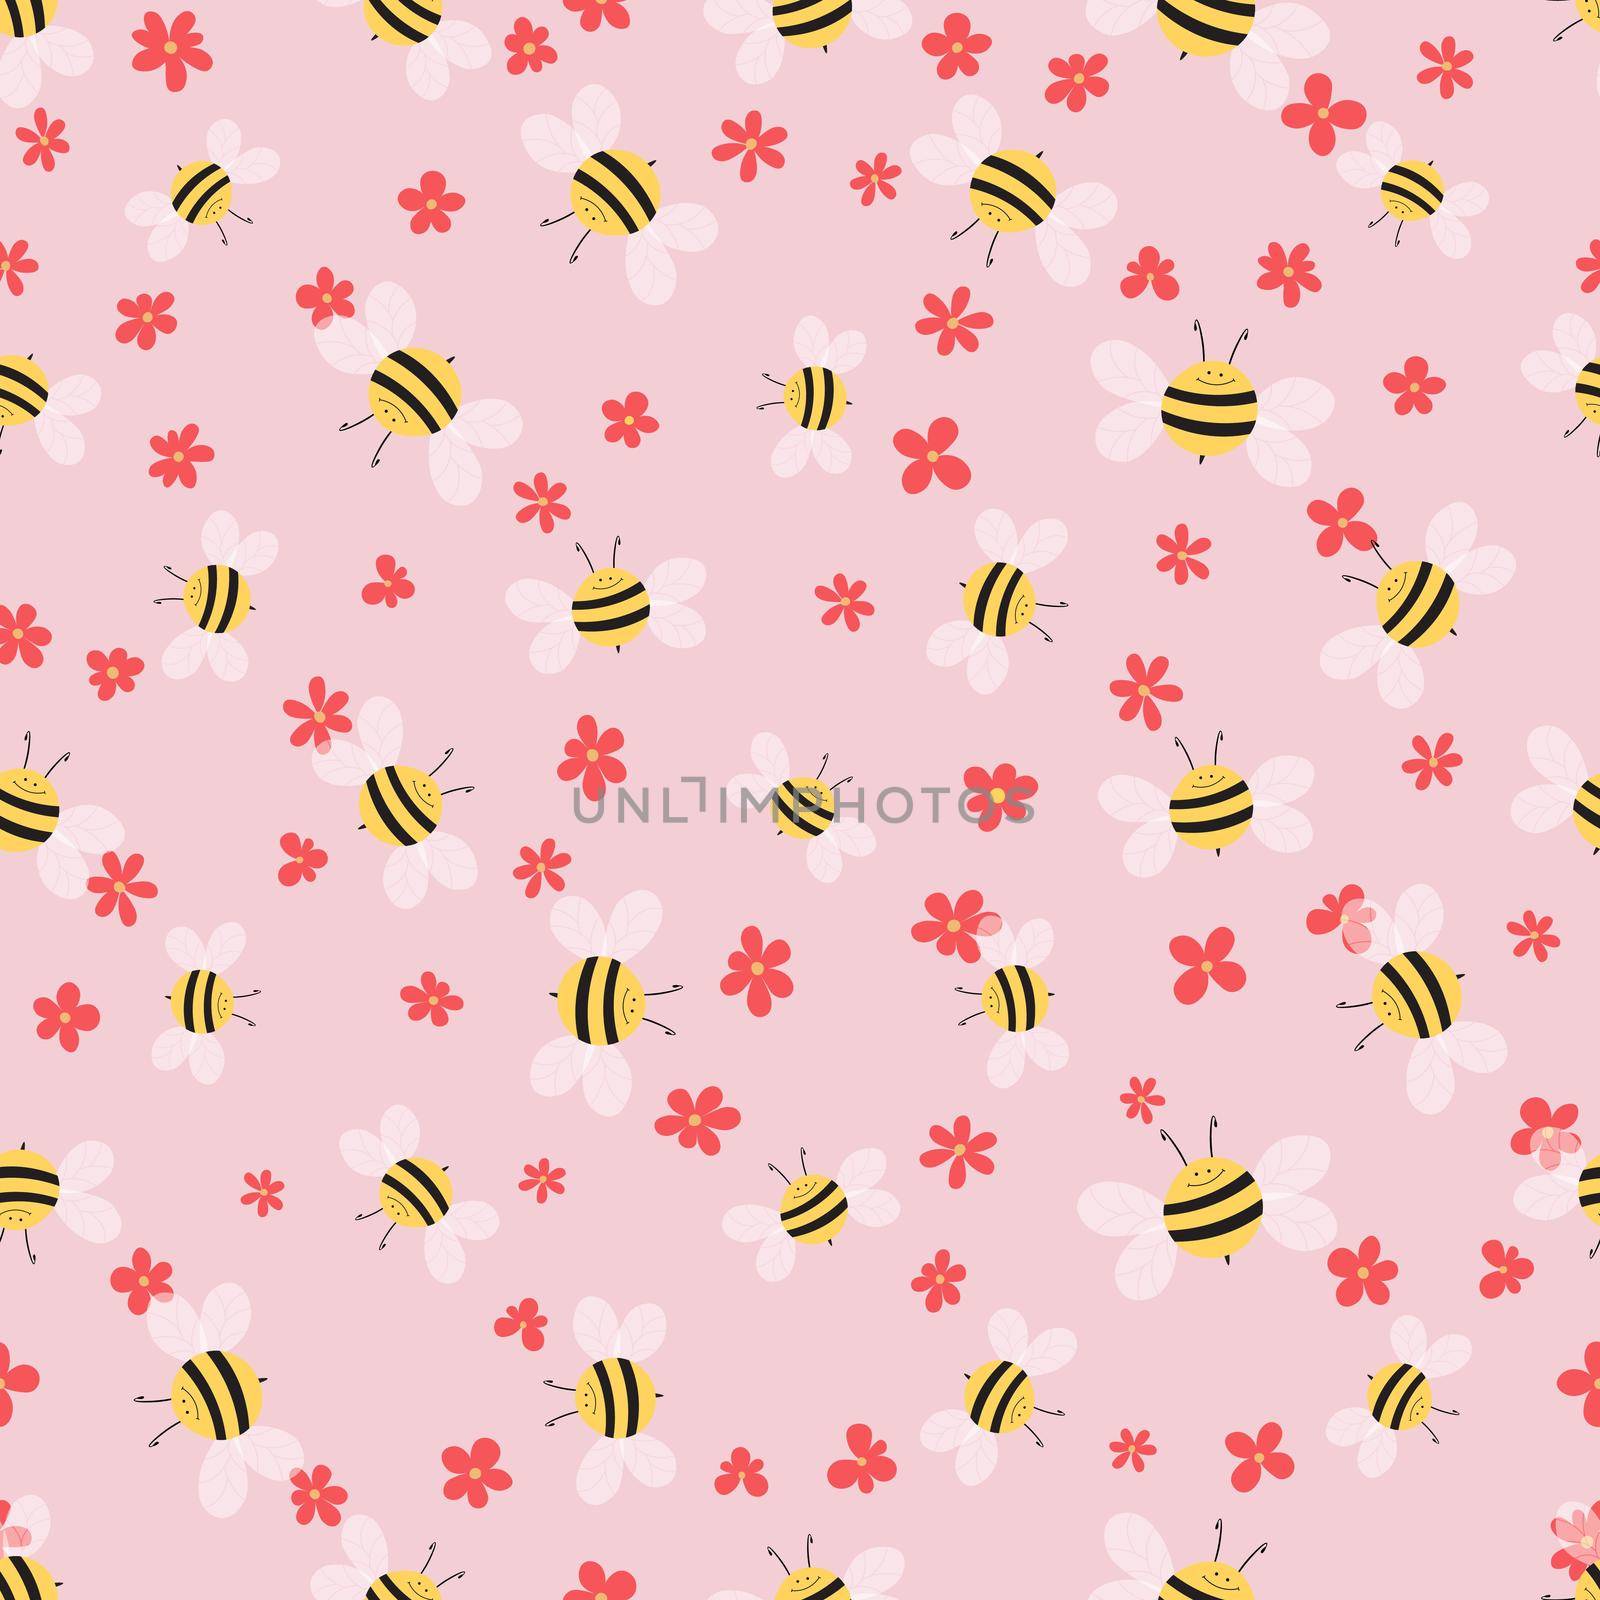 Seamless pattern with bees and flowers on color background. Adorable cartoon wasp characters. Template design for invitation, cards, textile, fabric. Doodle style. Vector stock illustration. by allaku